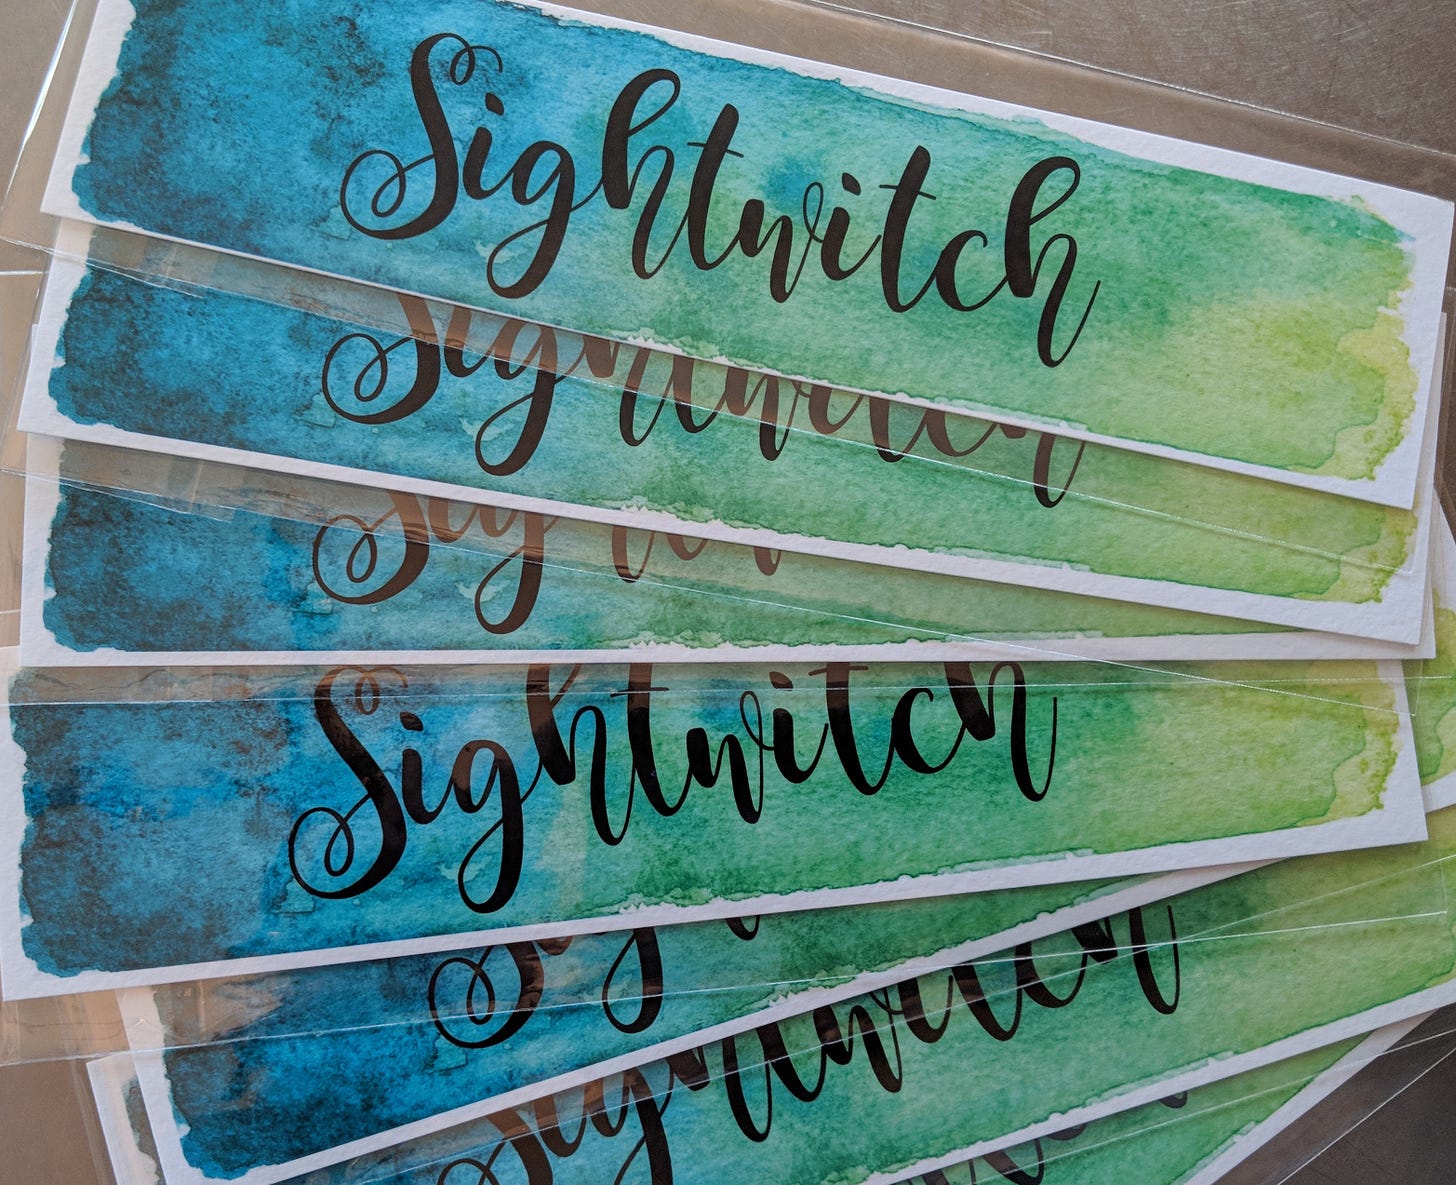 Bookmarks that say Sightwitch on them in watercolors